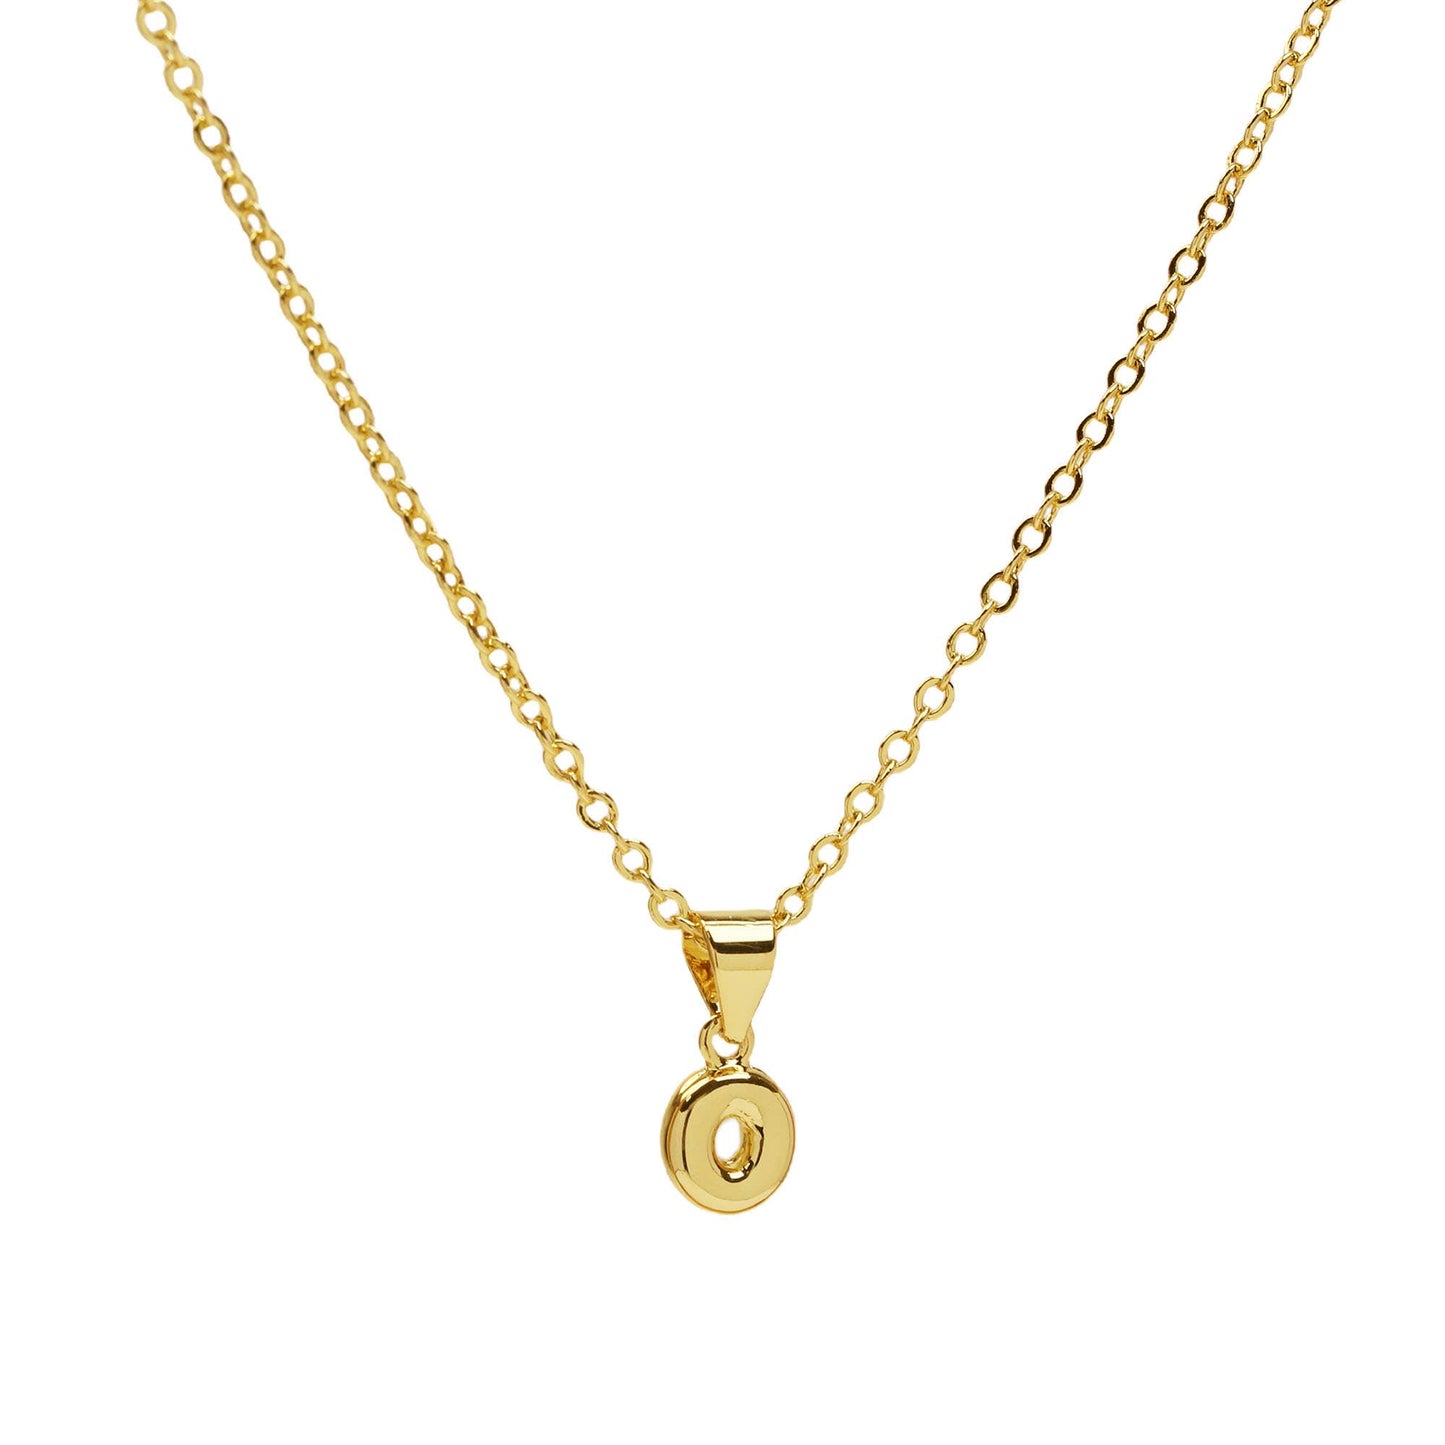 Initial Mini Balloon Bubble 18K Gold Necklace: A